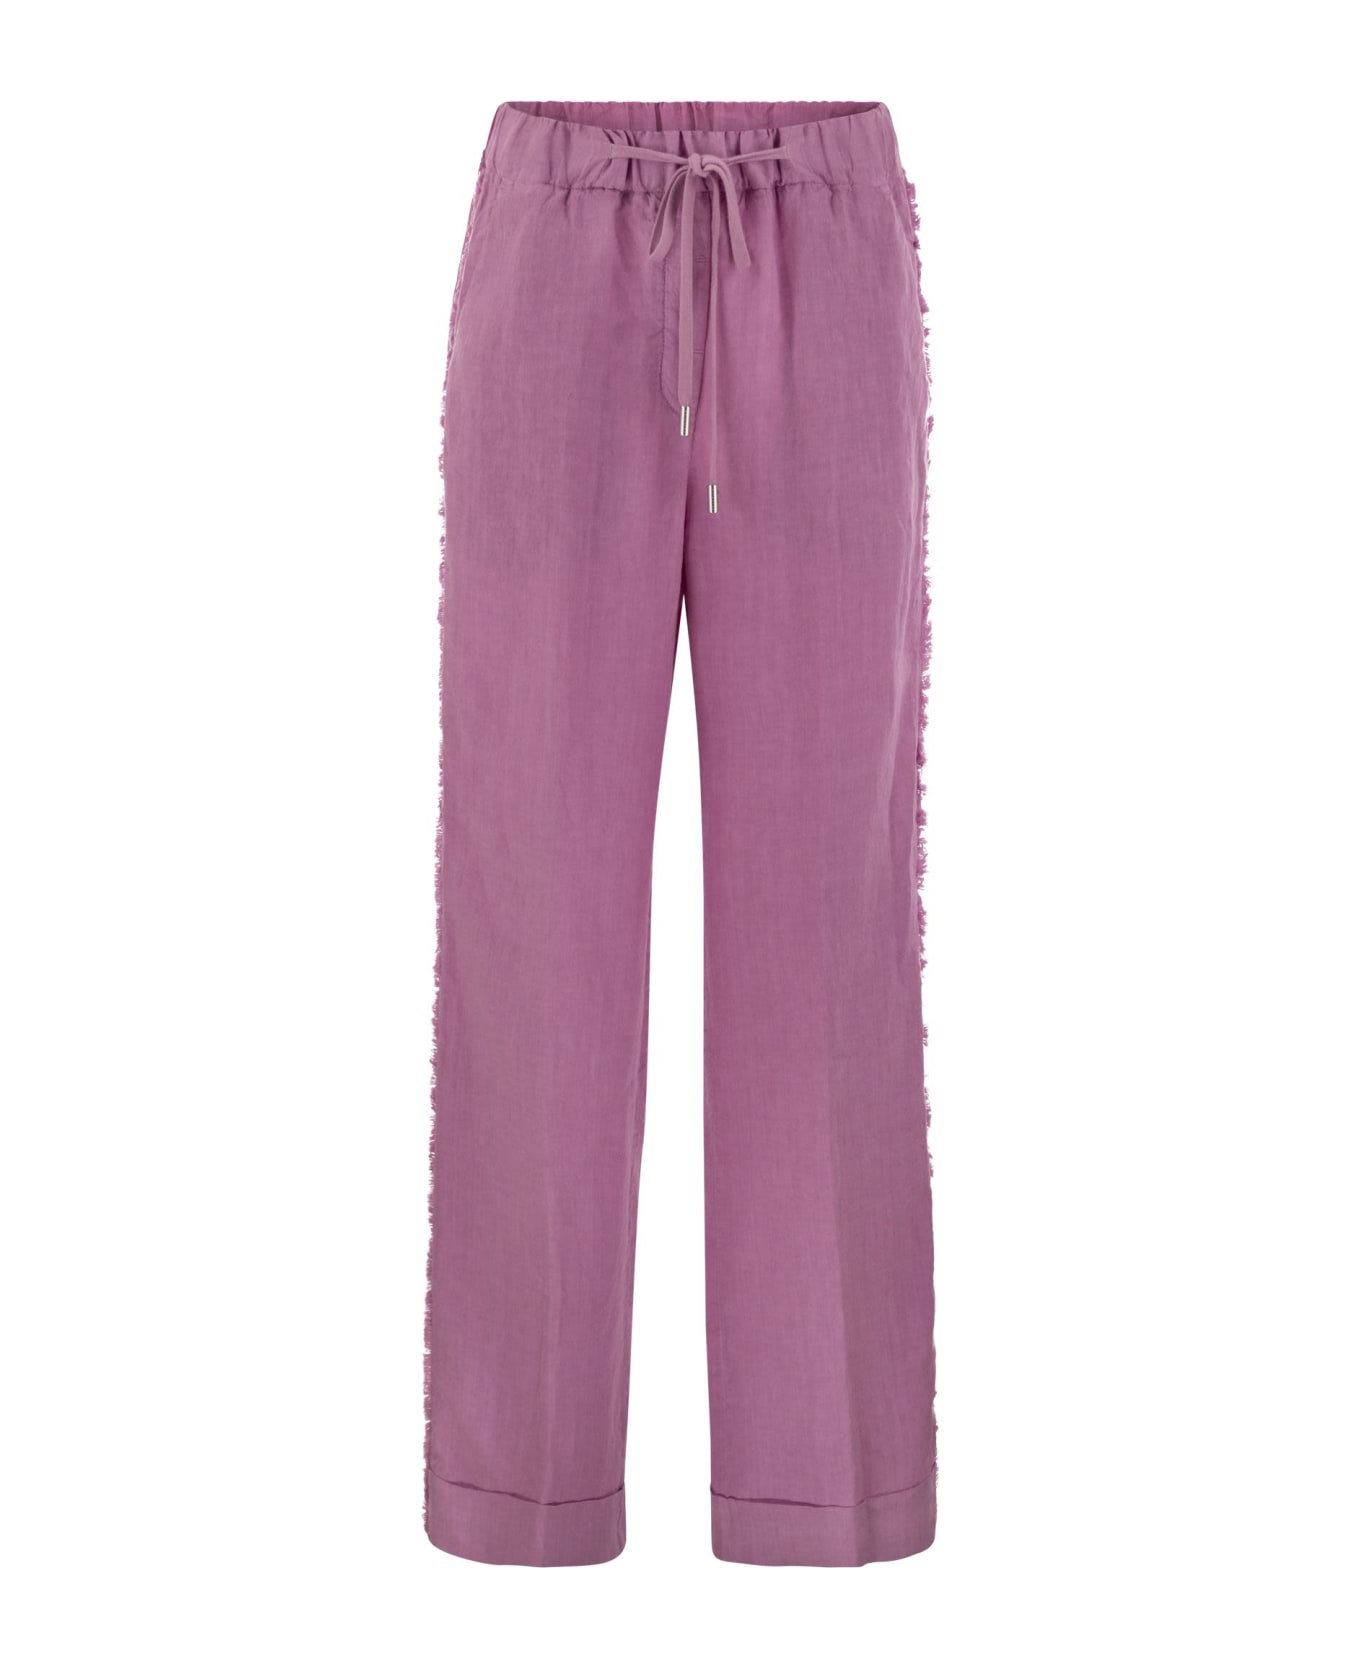 Peserico Linen Trousers With Side Fringes - Pink ボトムス